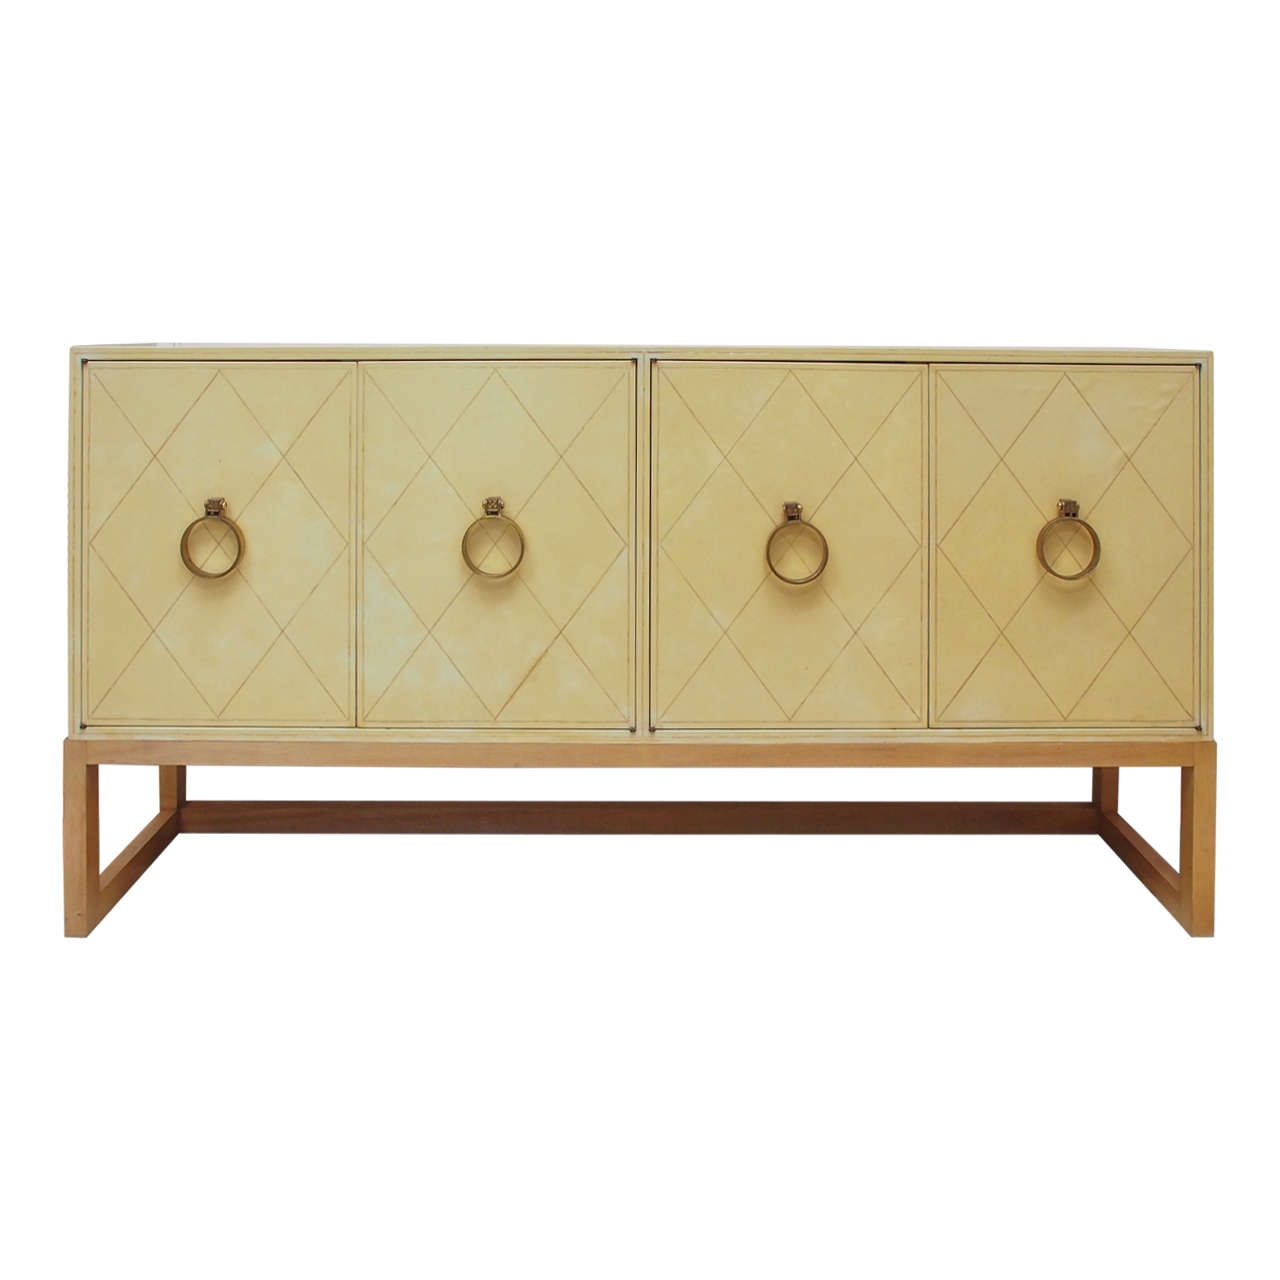 NEW PRICE SALE Exceptional Four-Door Credenza by Tommi Parzinger, circa 1940s For Sale